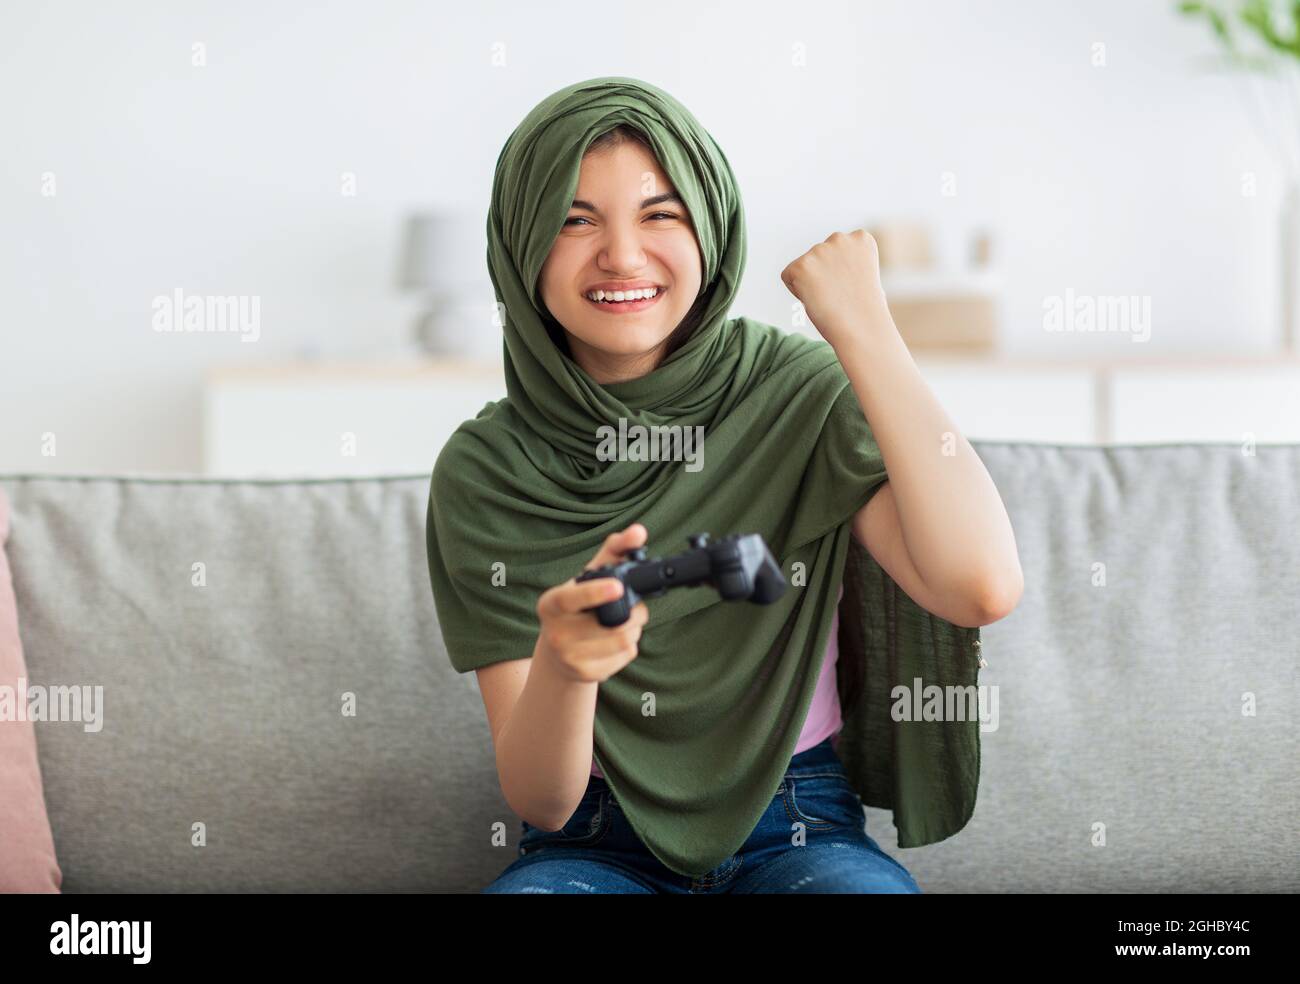 Triumphant Indian teen girl in hijab with joystick playing videogame, making YES gesture, celebrating victory at home Stock Photo